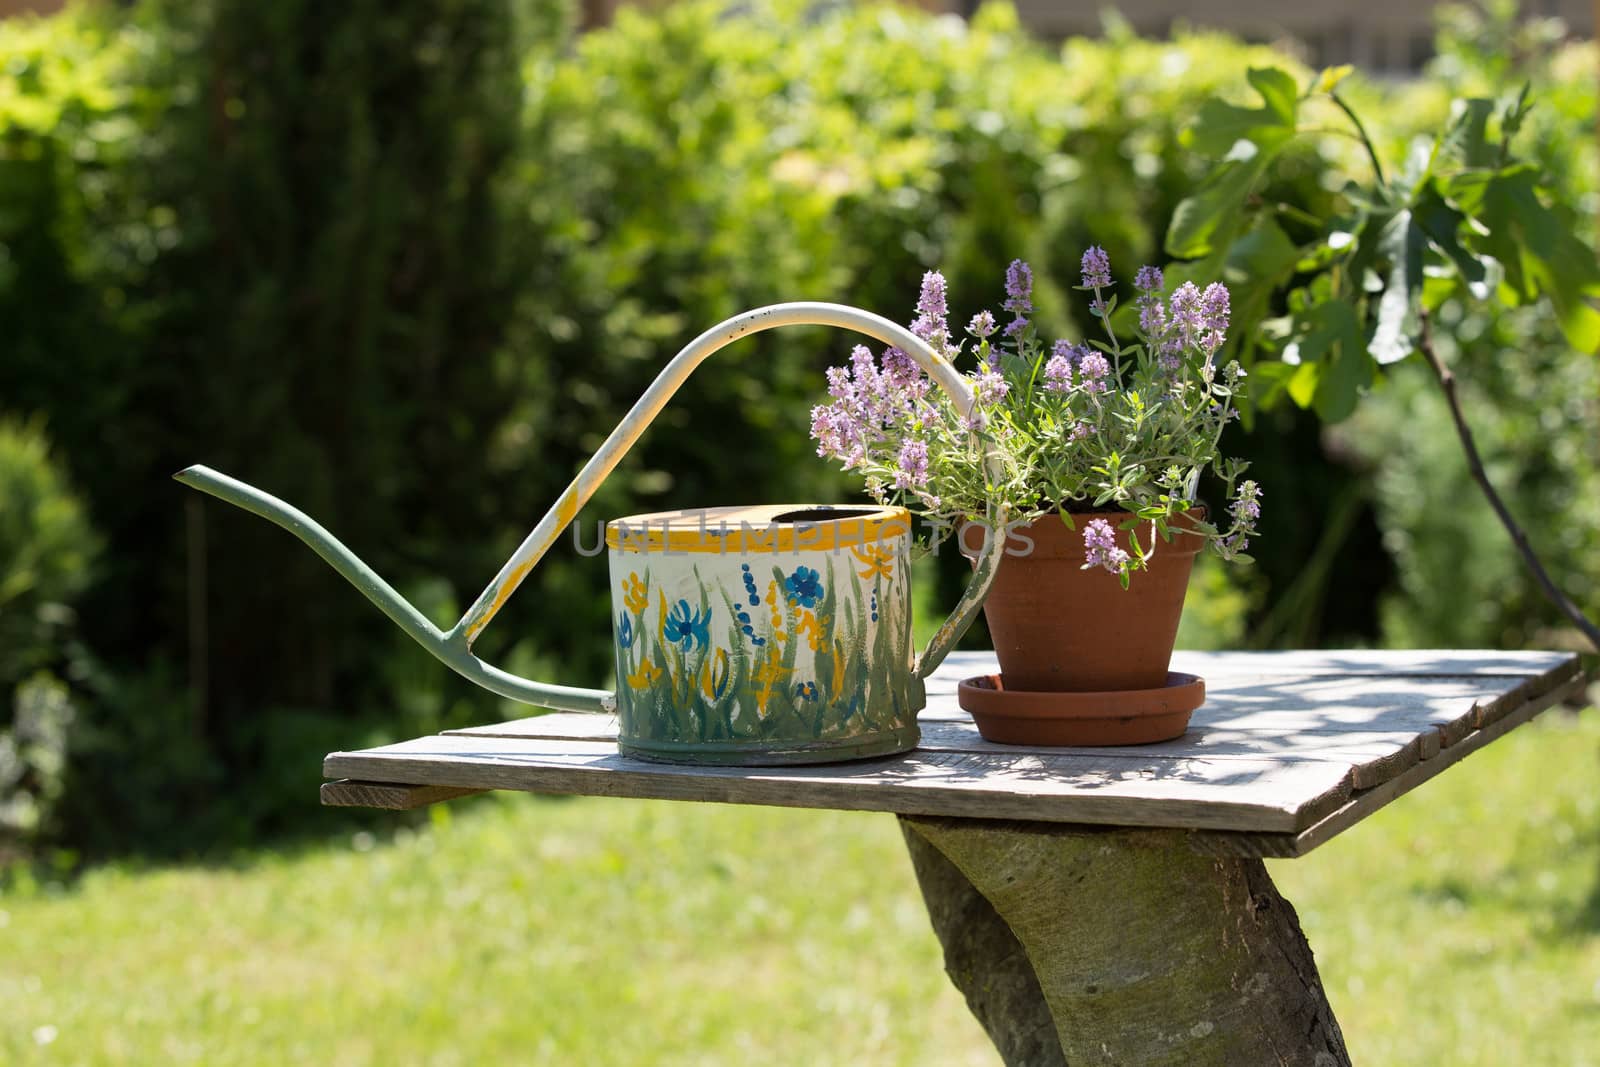 Old watering can and flower on a wooden table.